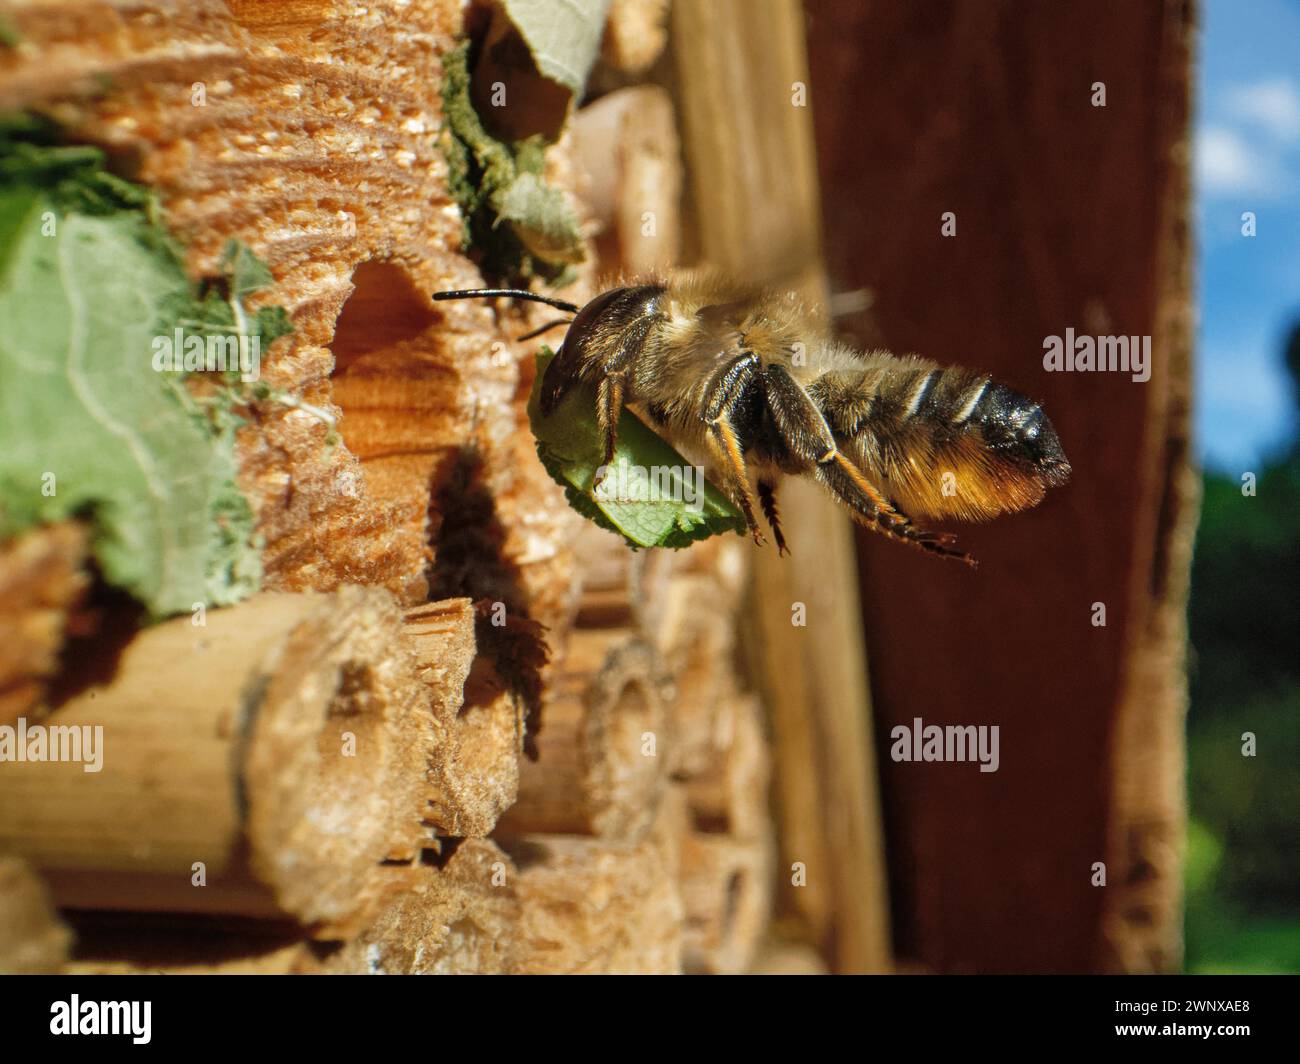 Wood-carving leafcutter bee Megachile ligniseca, female flying towards an insect hotel with a leaf to seal her nest in a drilled hole, Wiltshire, UK. Stock Photo